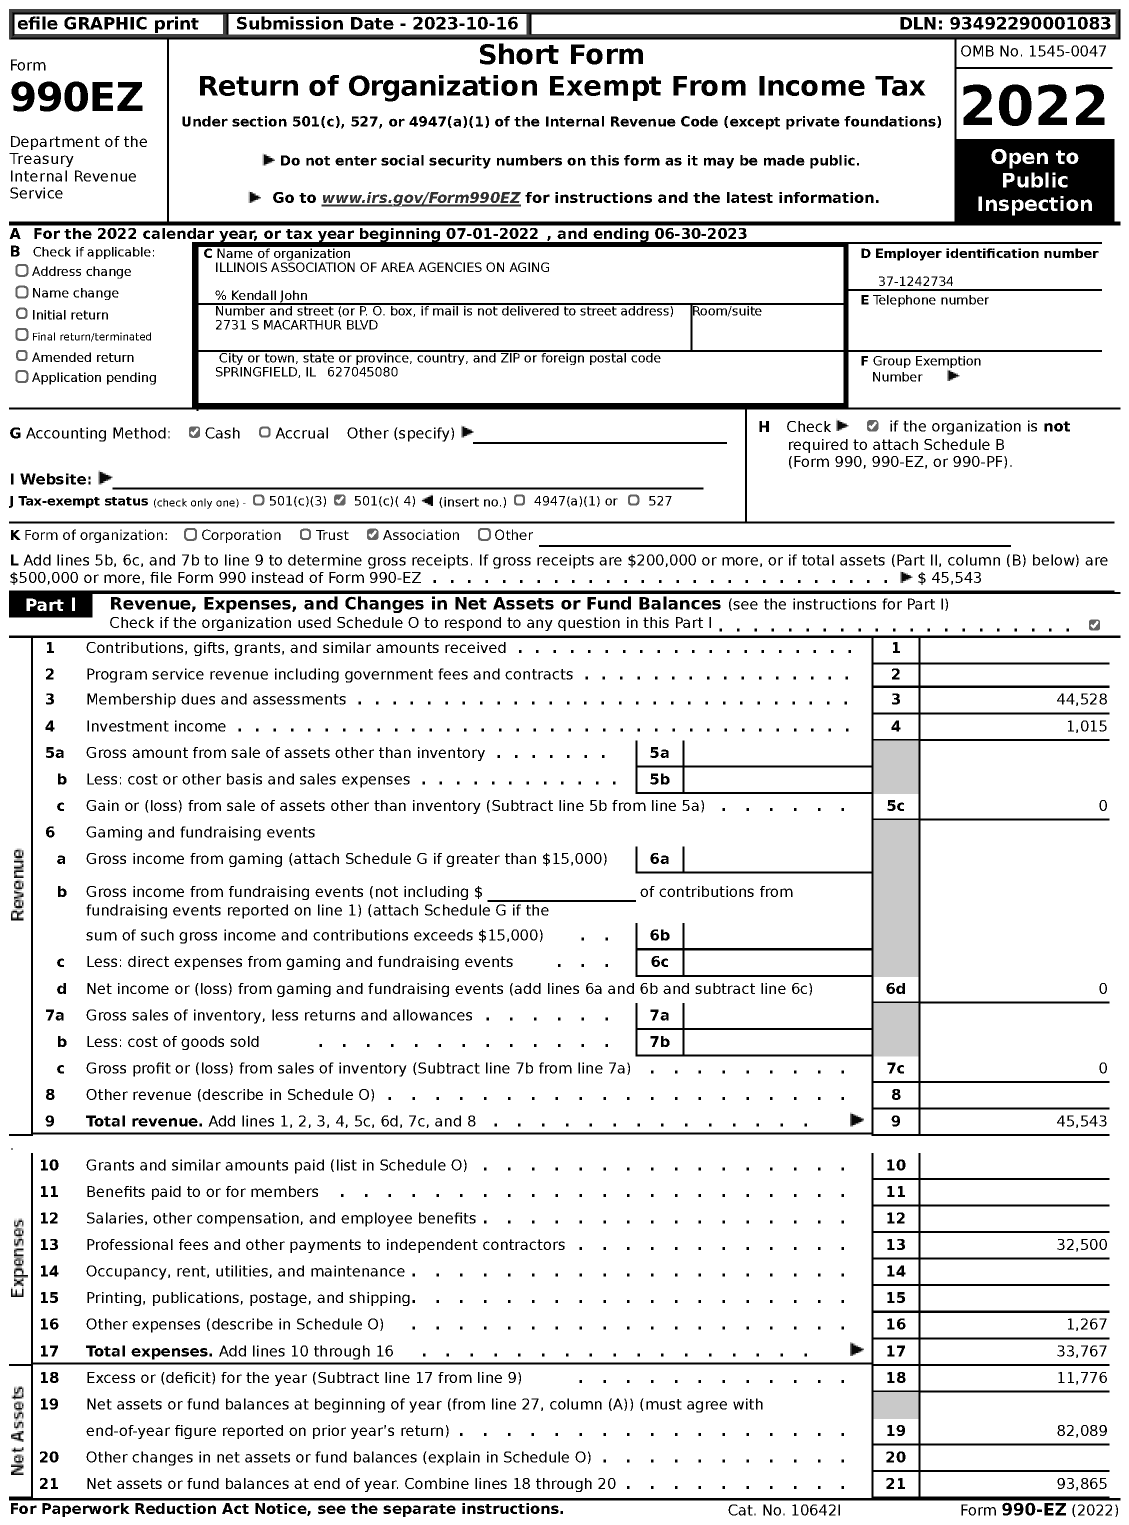 Image of first page of 2022 Form 990EZ for Illinois Association of Area Agencies on Aging